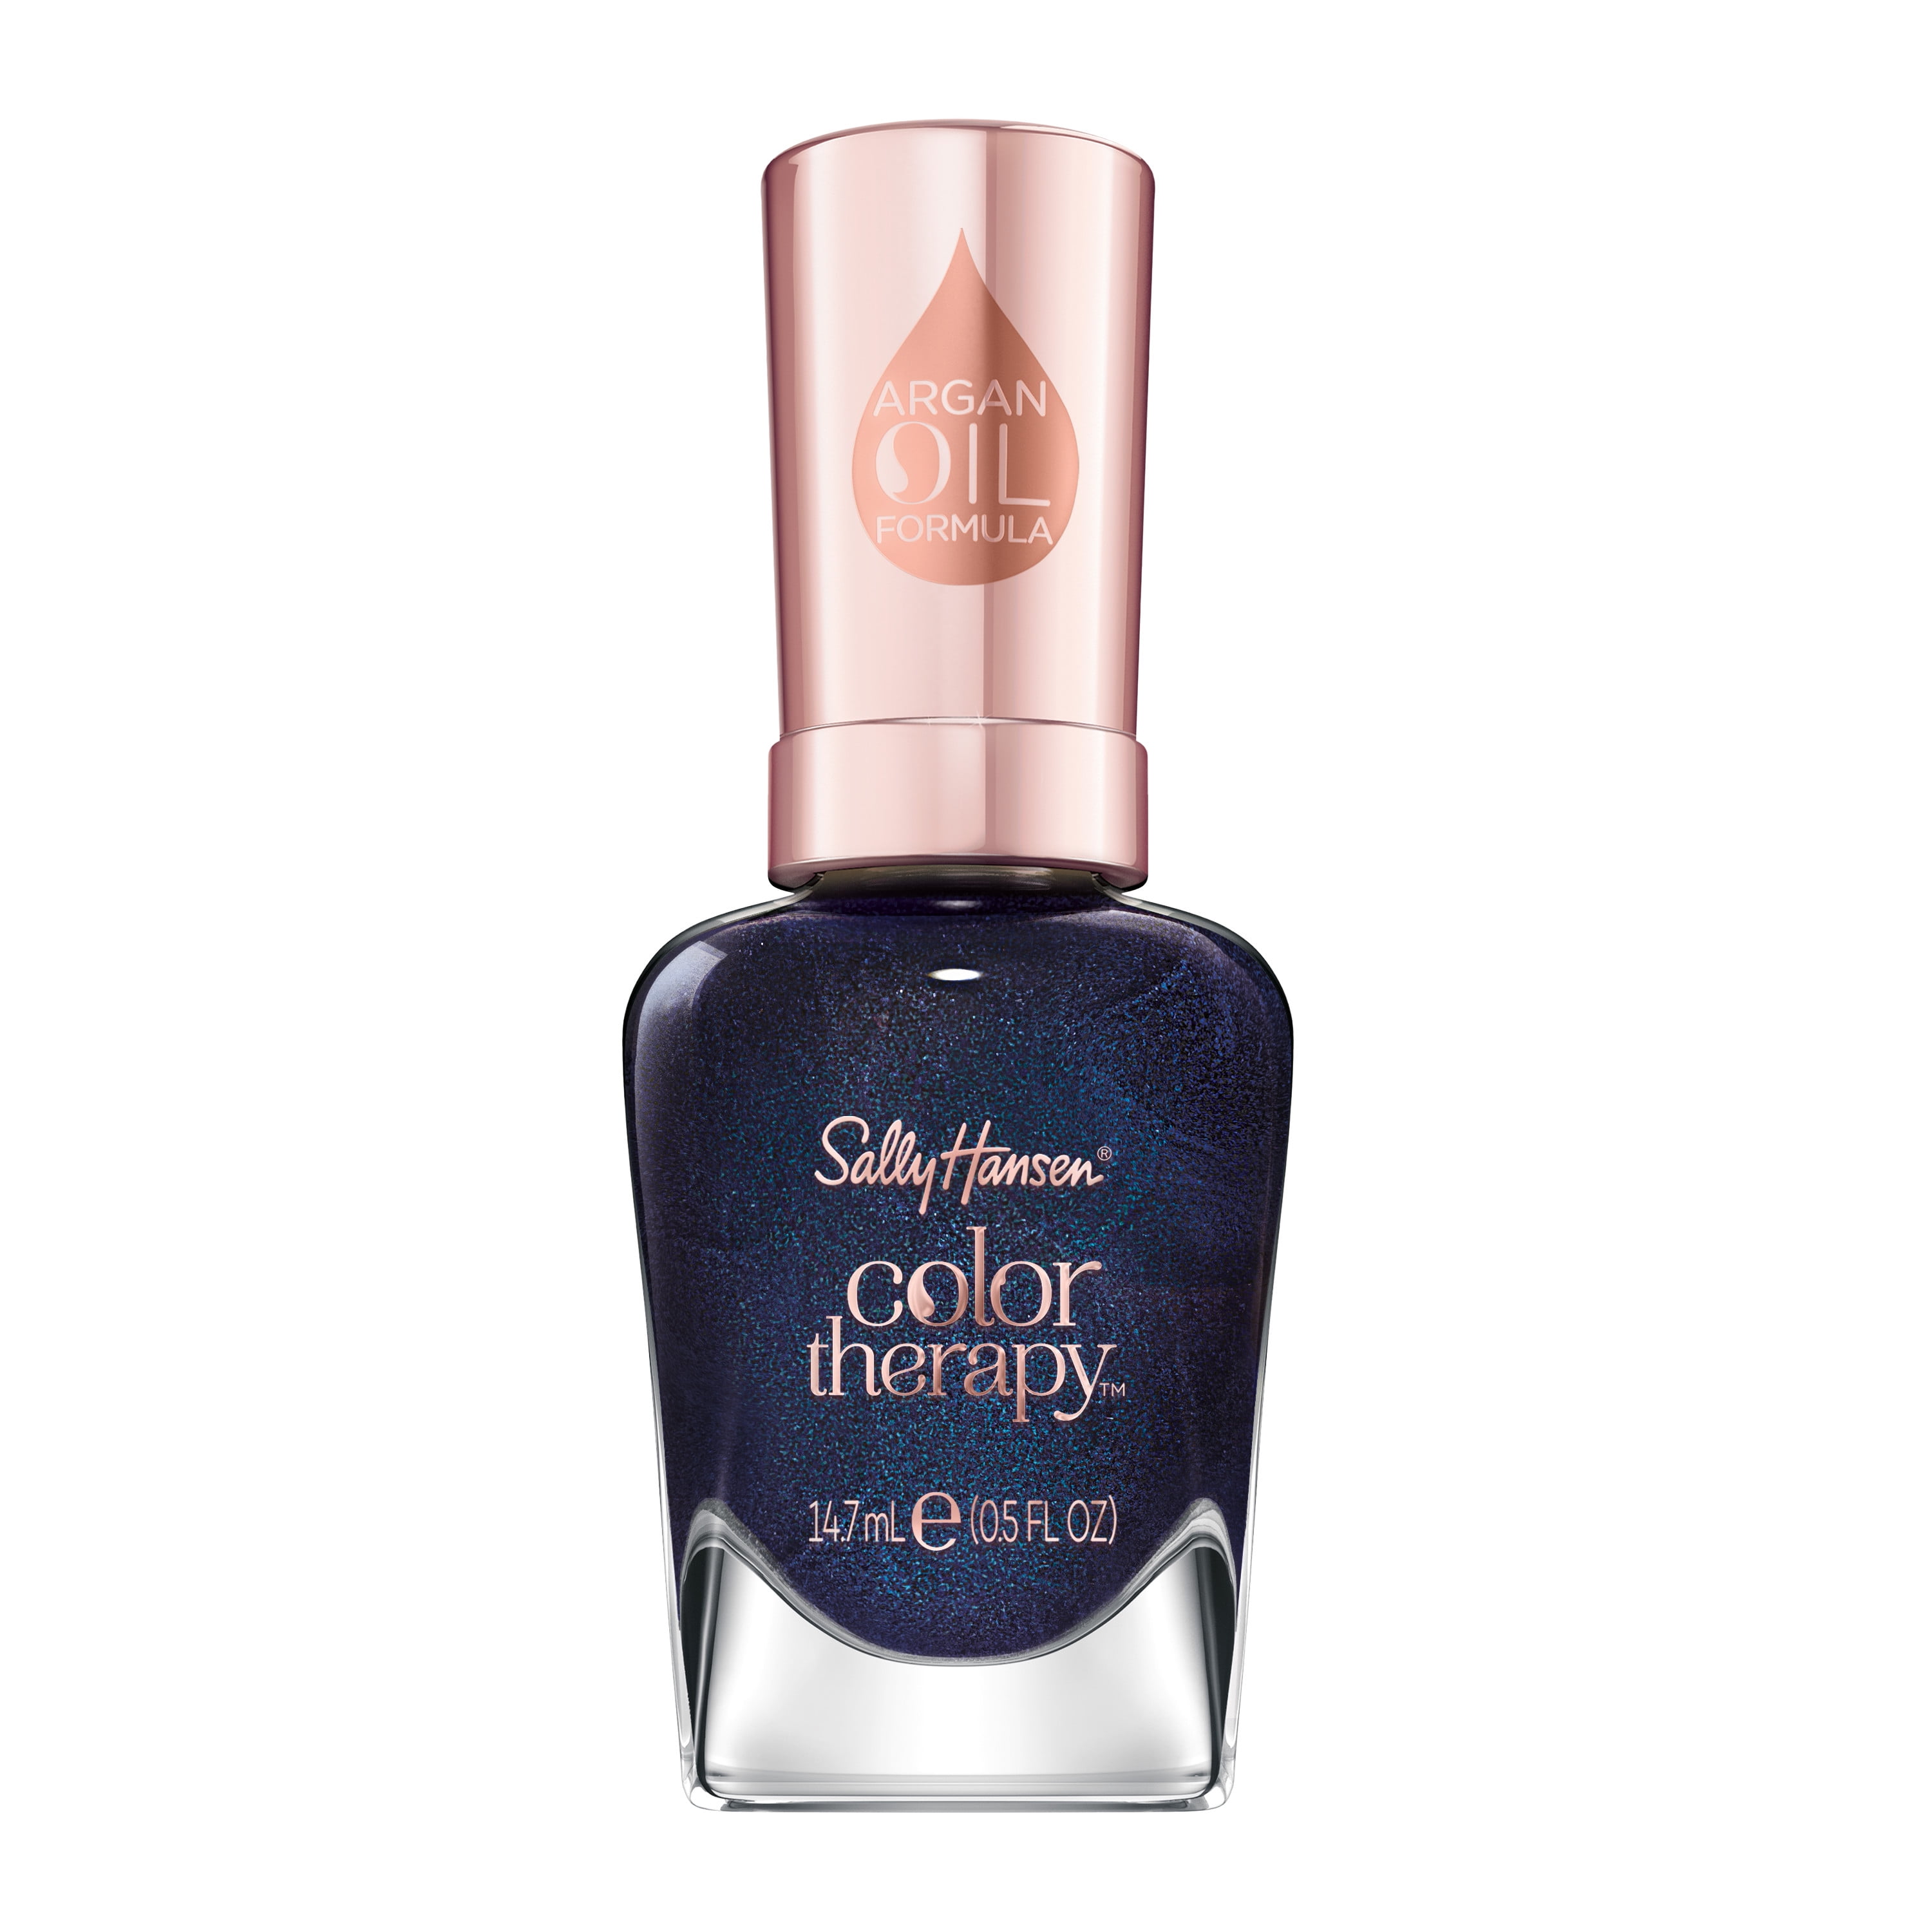 Sally Hansen Color Therapy Nail Color, Time for Blue  fl oz, Nail Polish,  Restorative, Argan Oil Formula, Instantly Moisturizes 